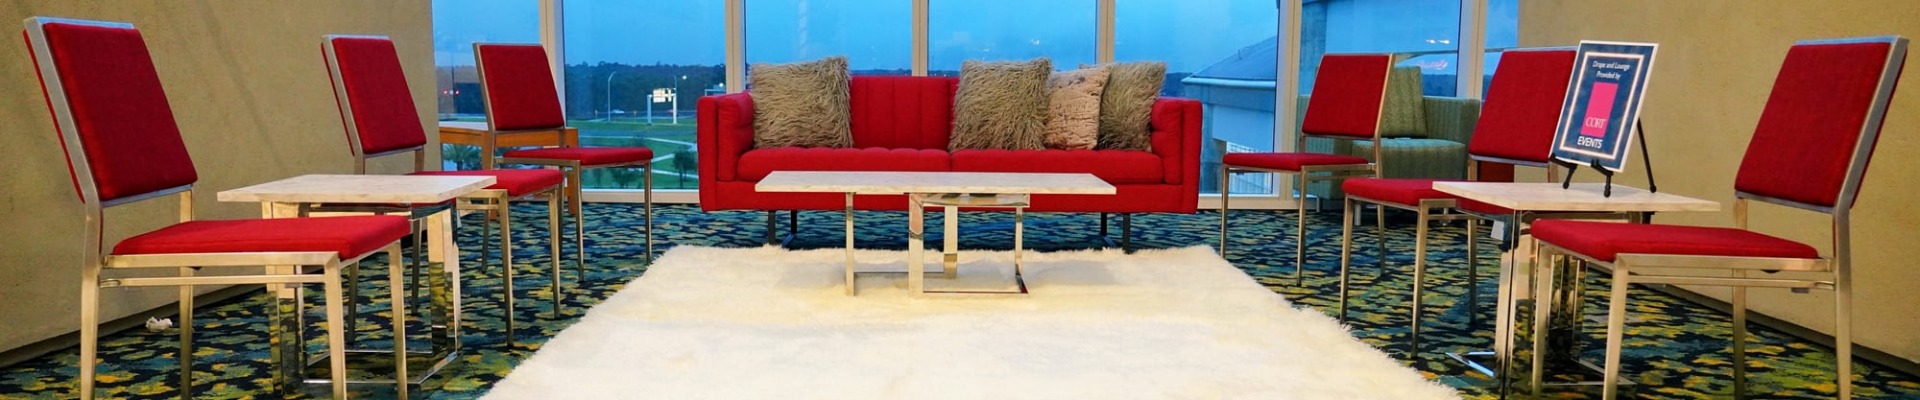 red chairs, red sofa and cream shag rug